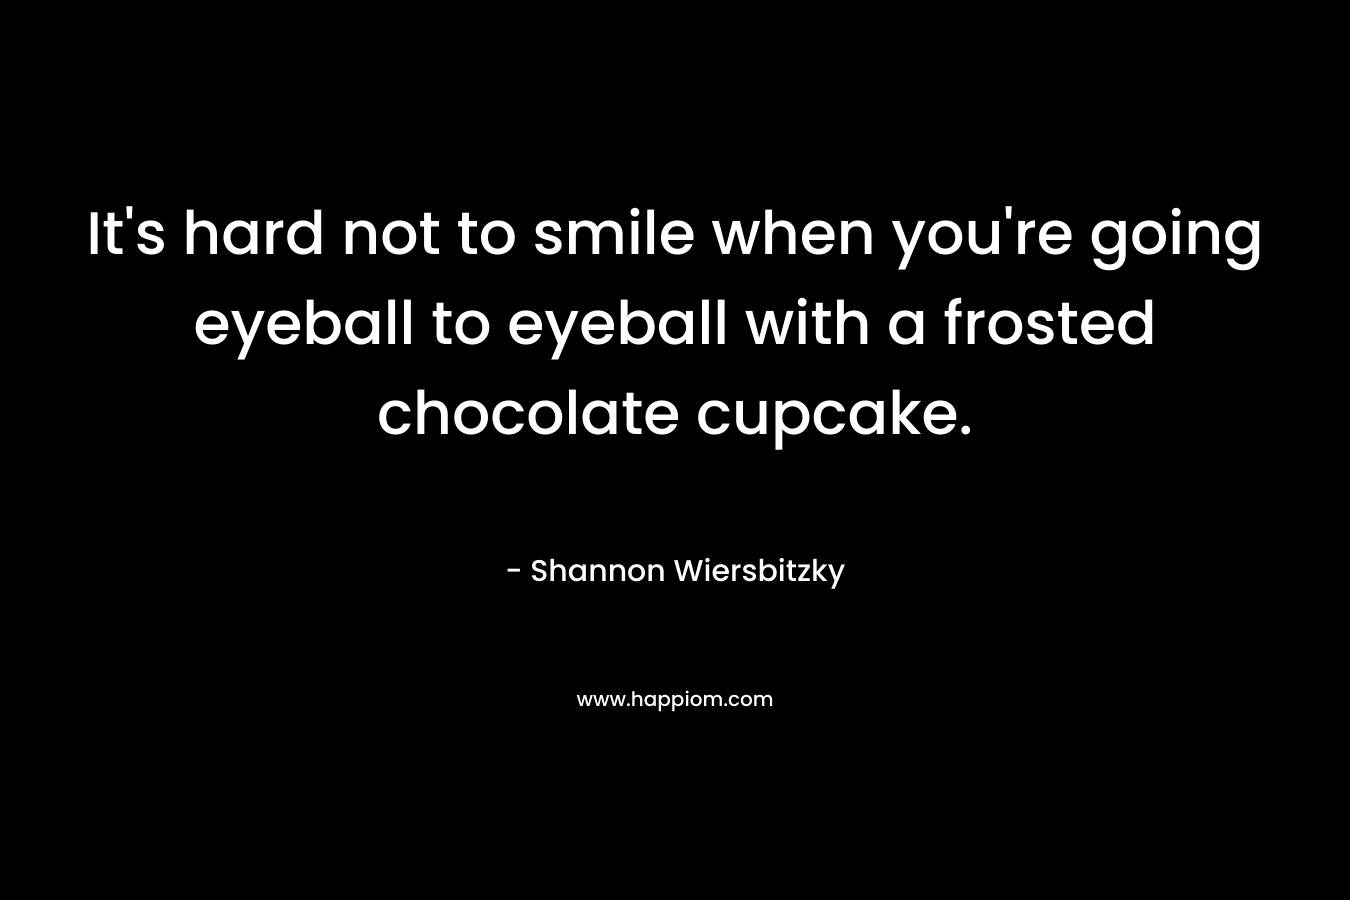 It's hard not to smile when you're going eyeball to eyeball with a frosted chocolate cupcake.